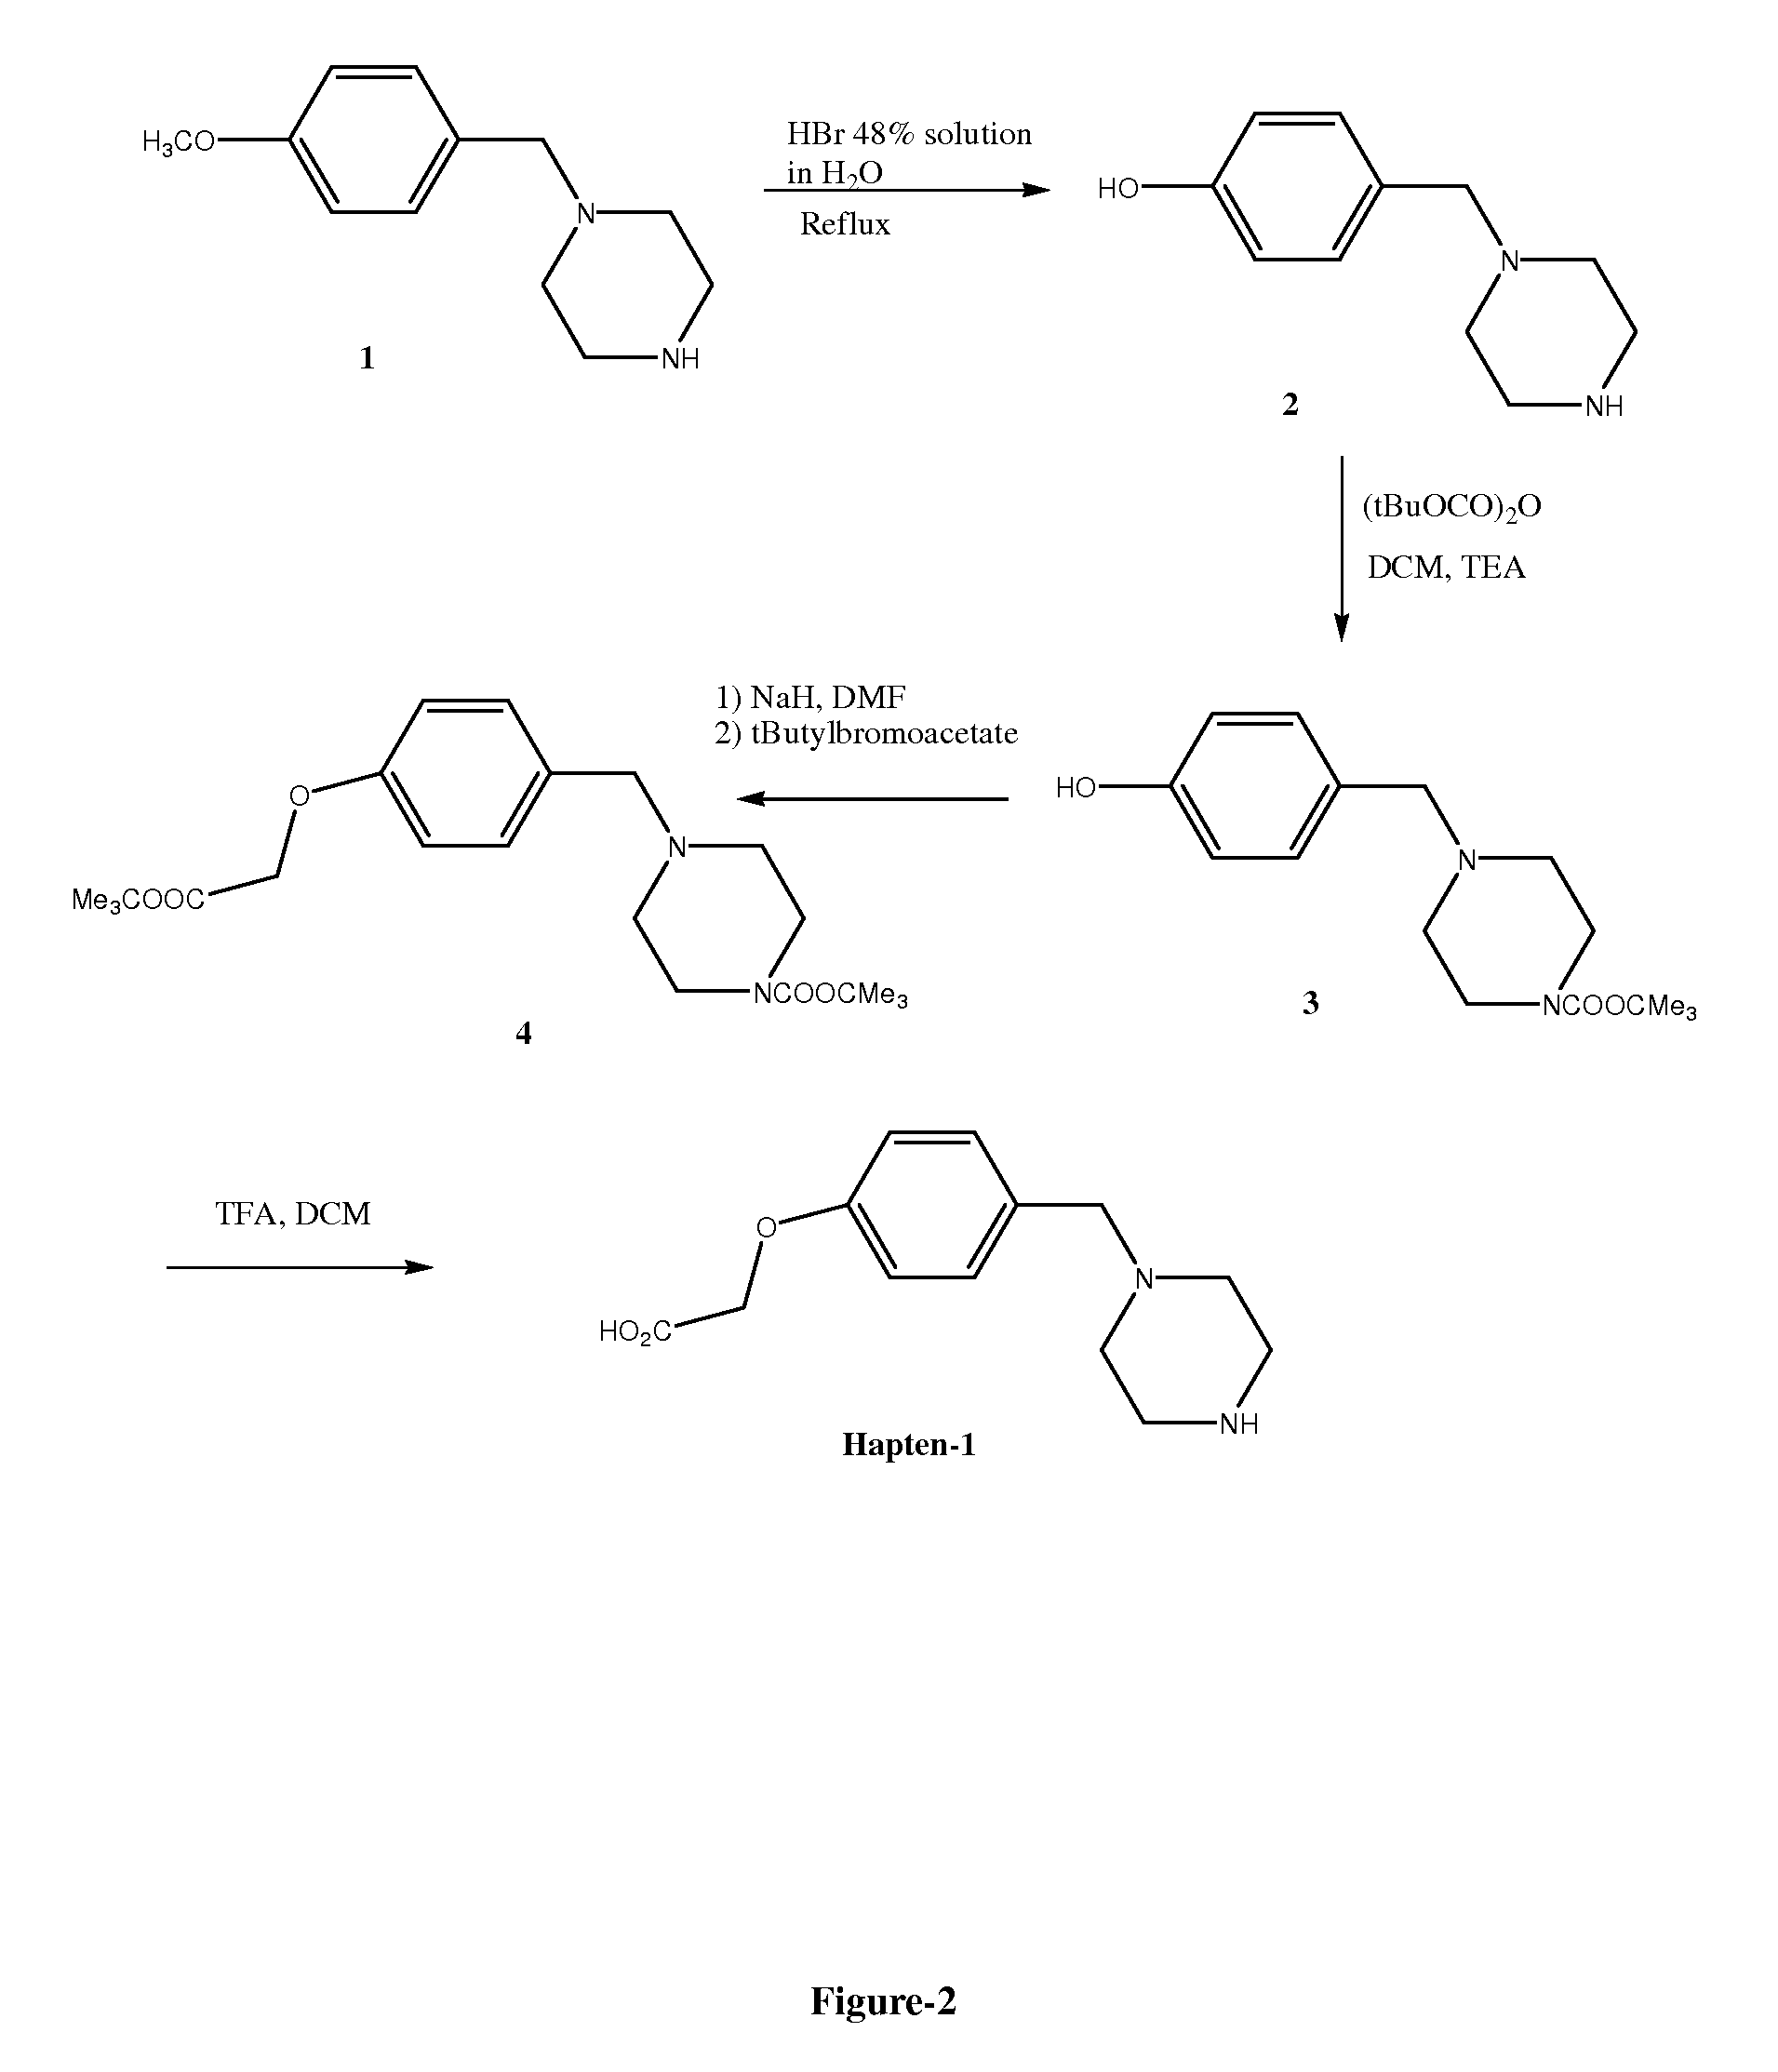 Assay for benzylpiperazine and metabolites